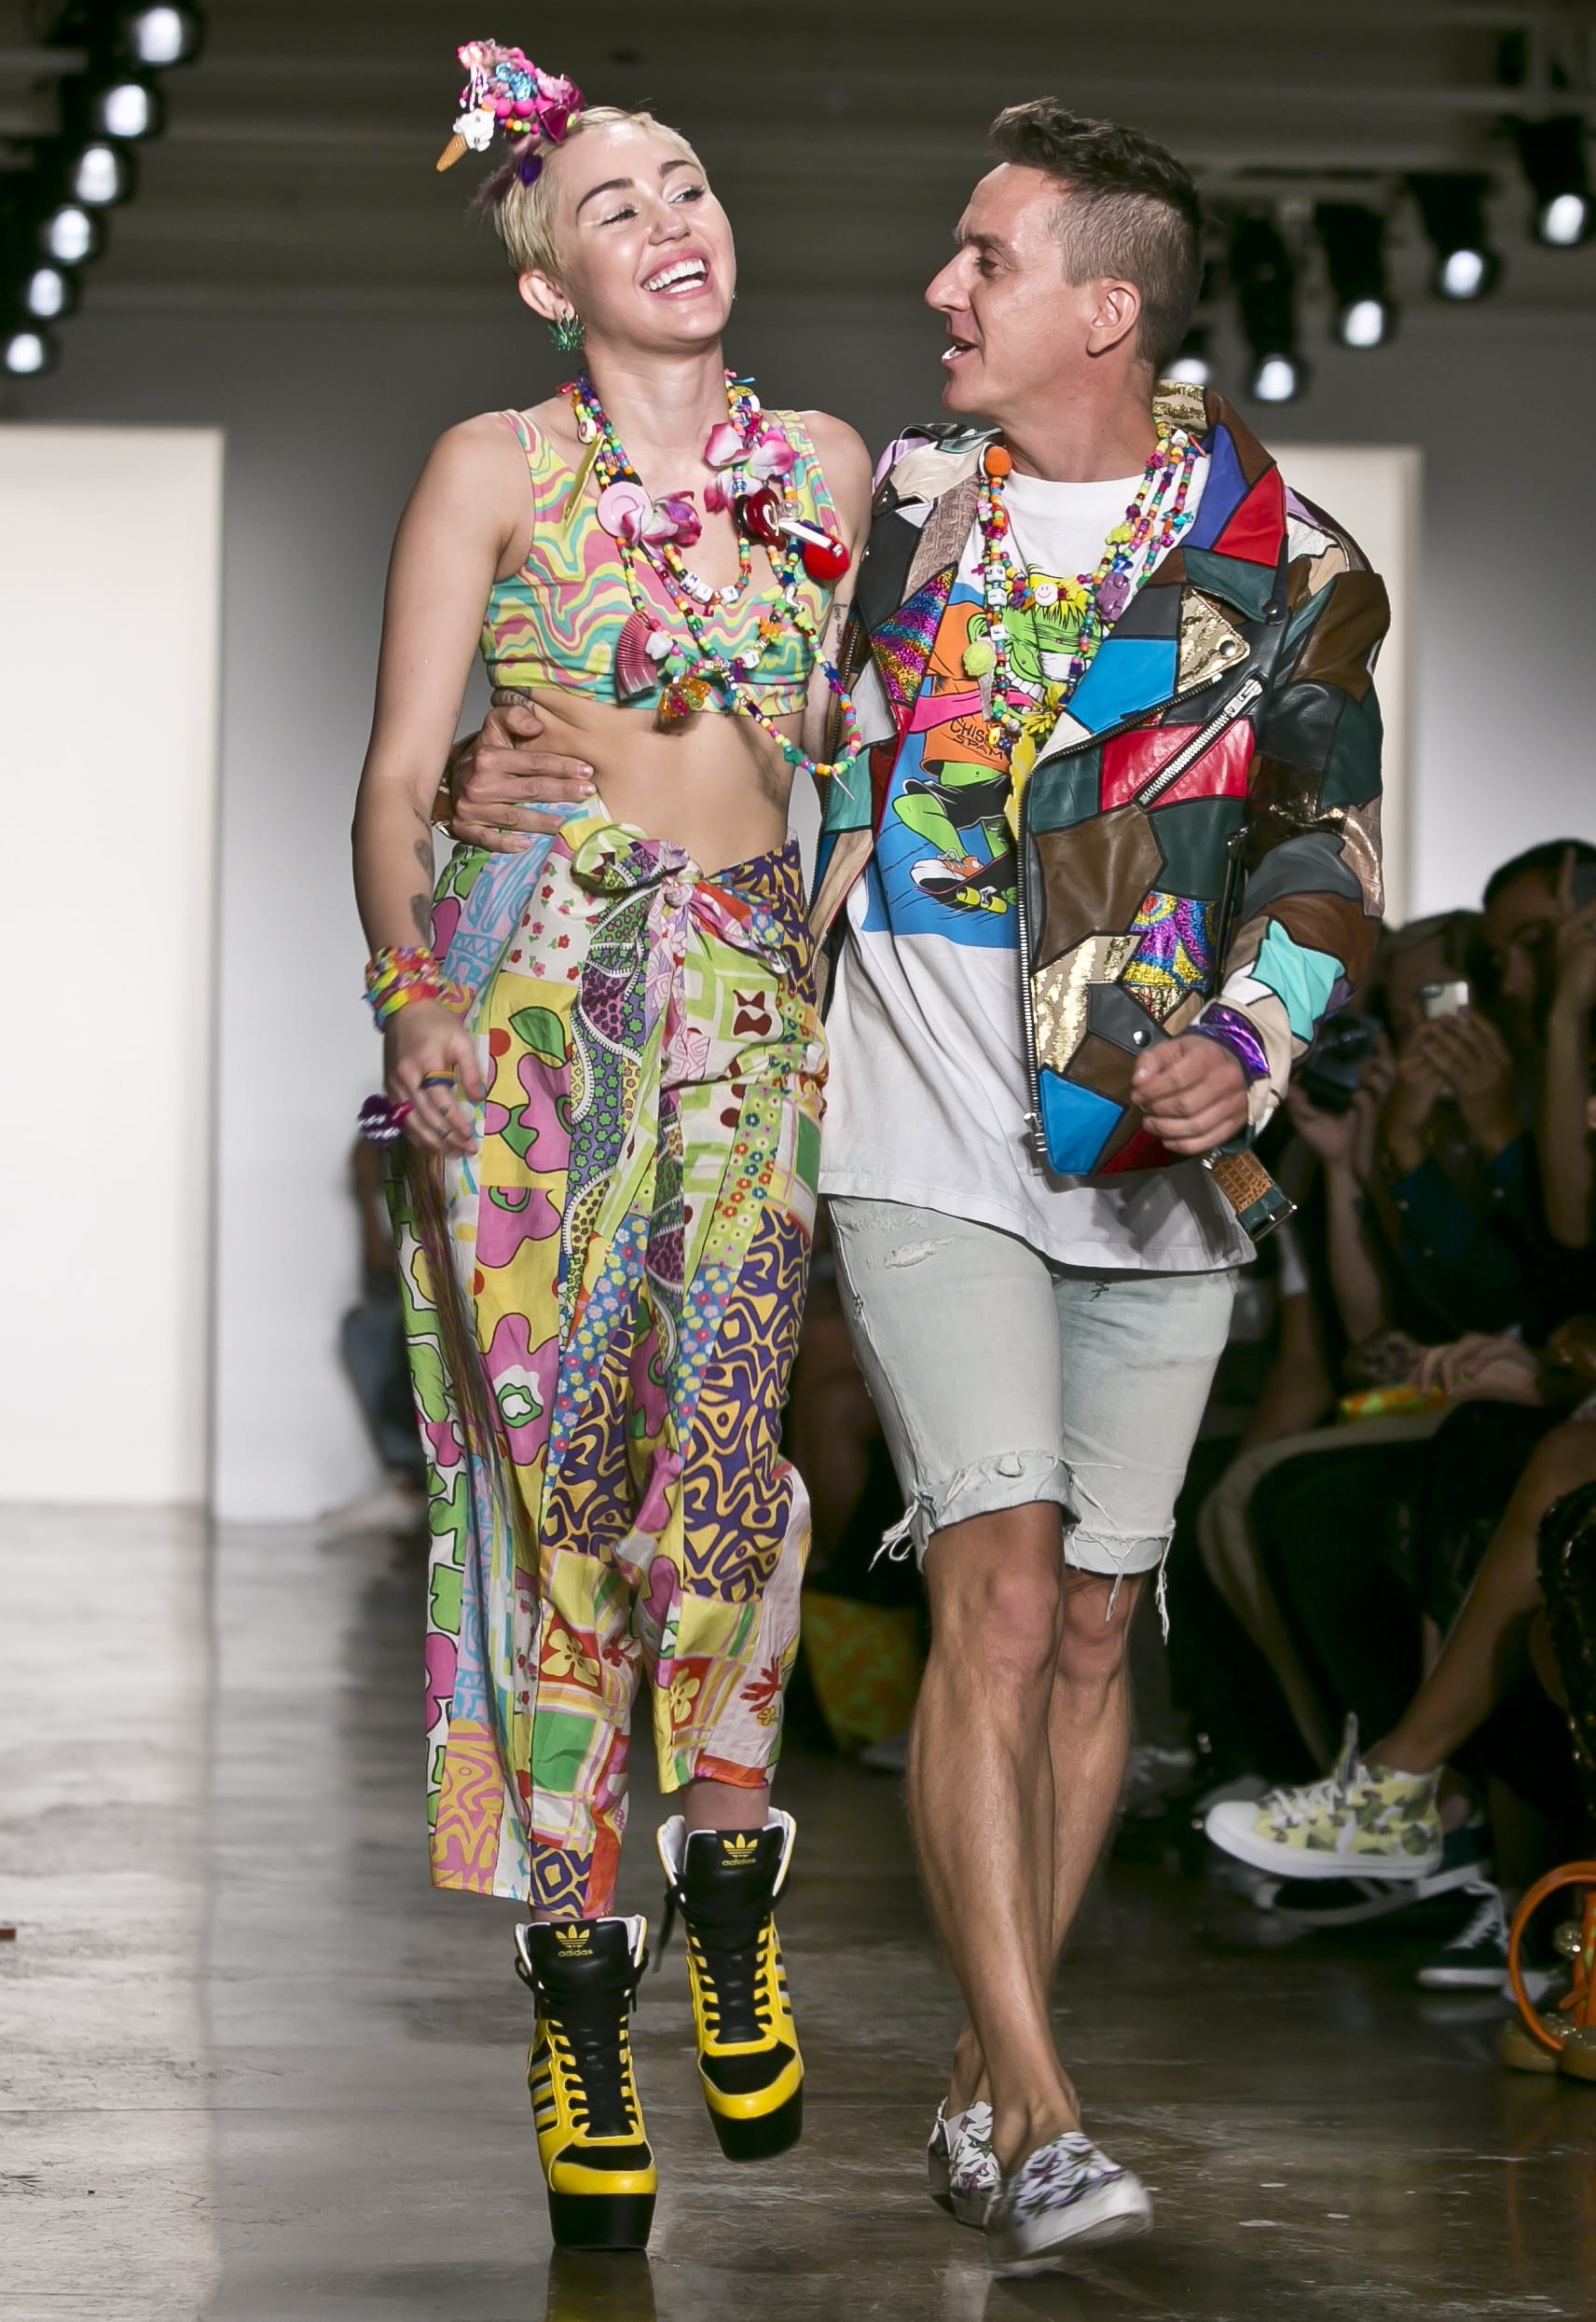 Entertainer Miley Cyrus, left, joins fashion designer Jeremy Scott for a walk on the runway after he showed his Spring 2015 collection during Fashion Week on Wednesday, Sept. 10, 2014 in New York.